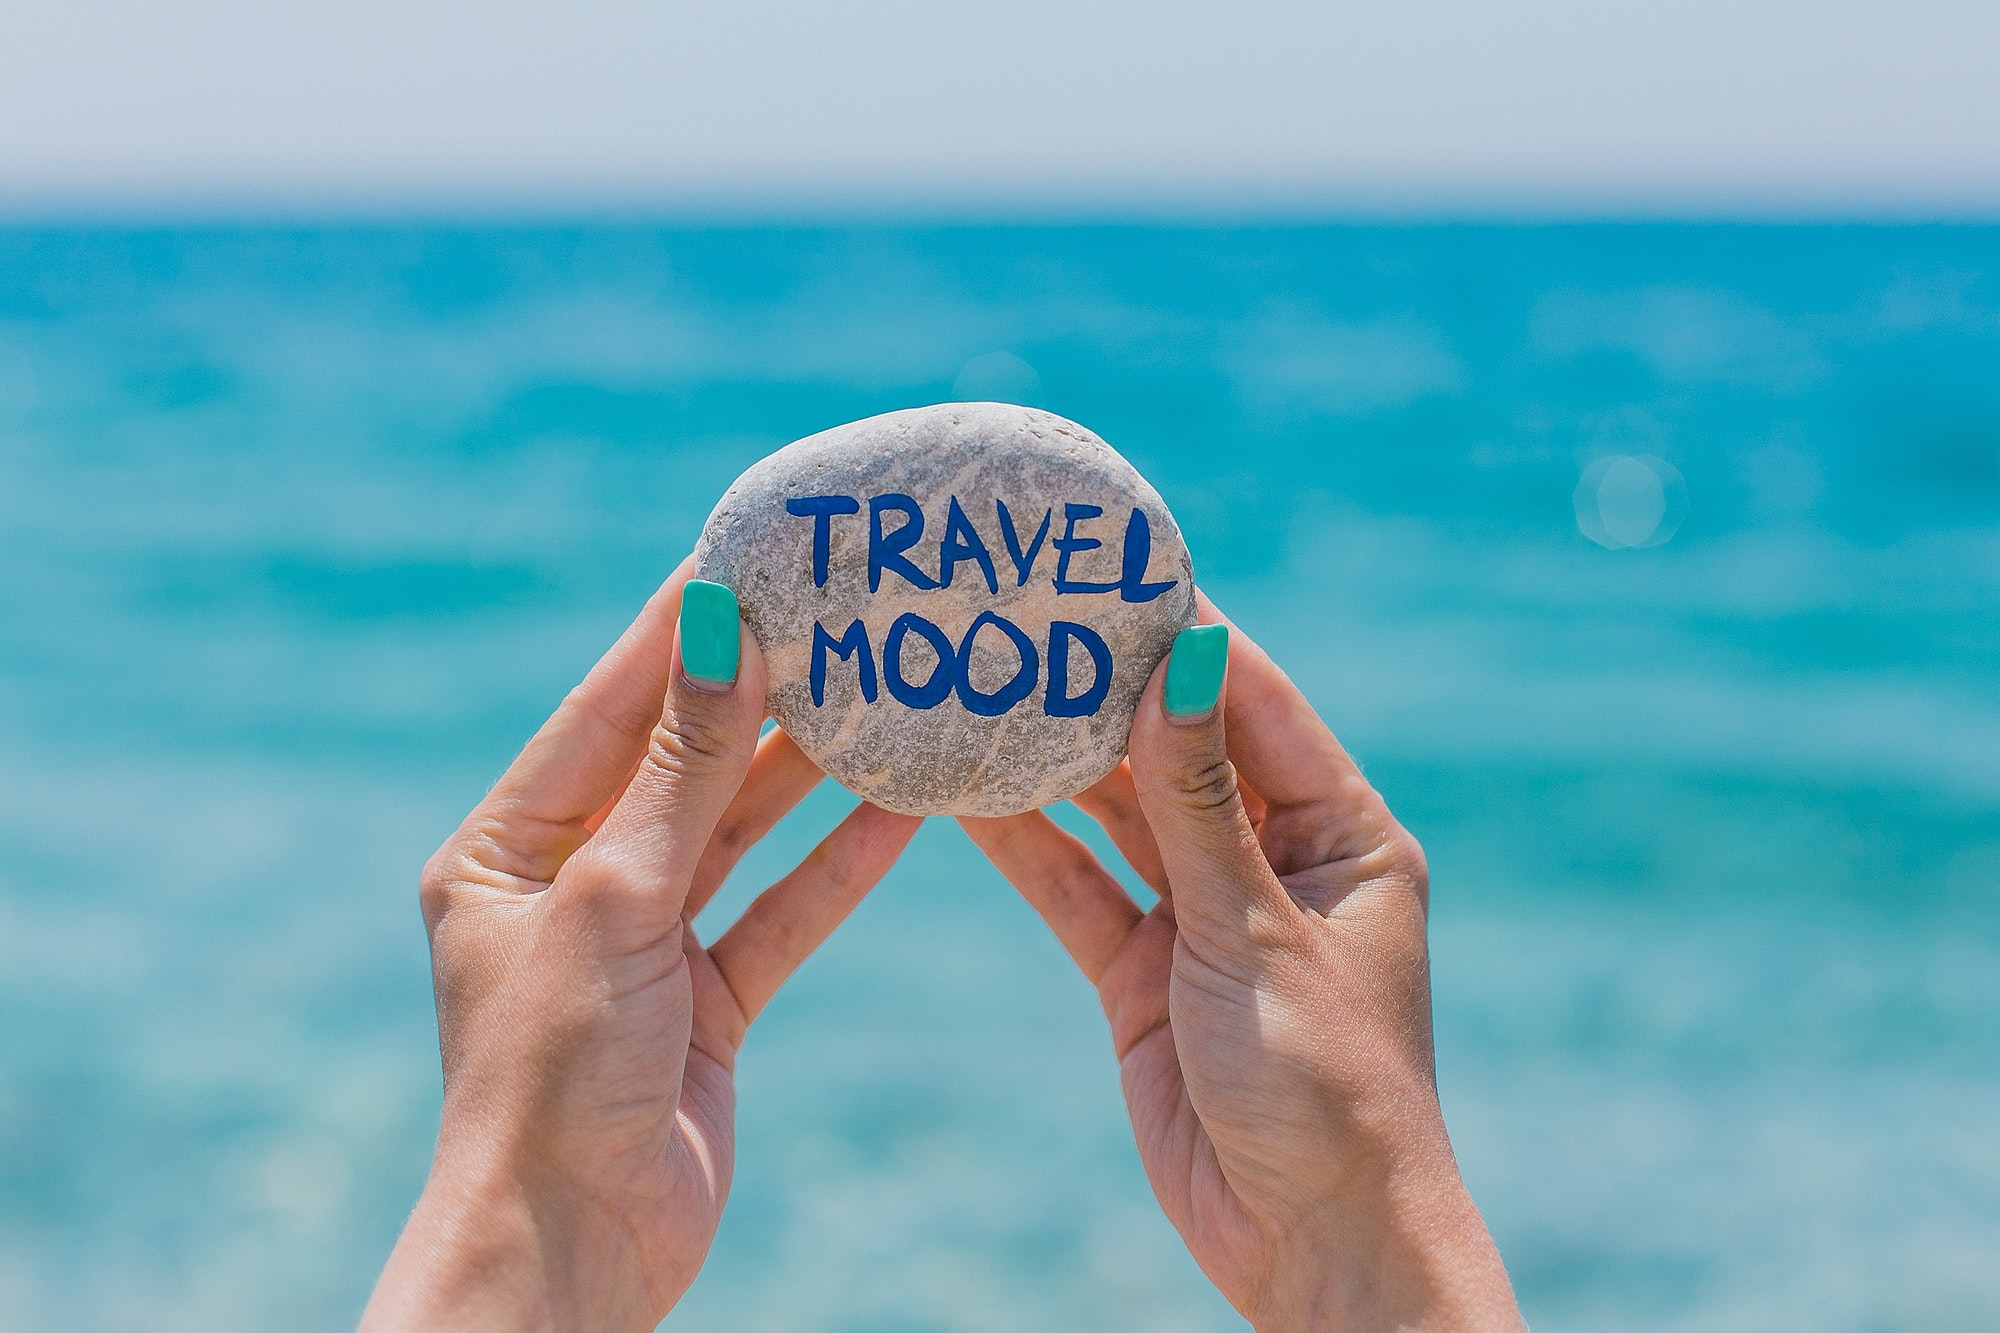 A young woman holds a stone with the inscription "Travel mood" in her hands